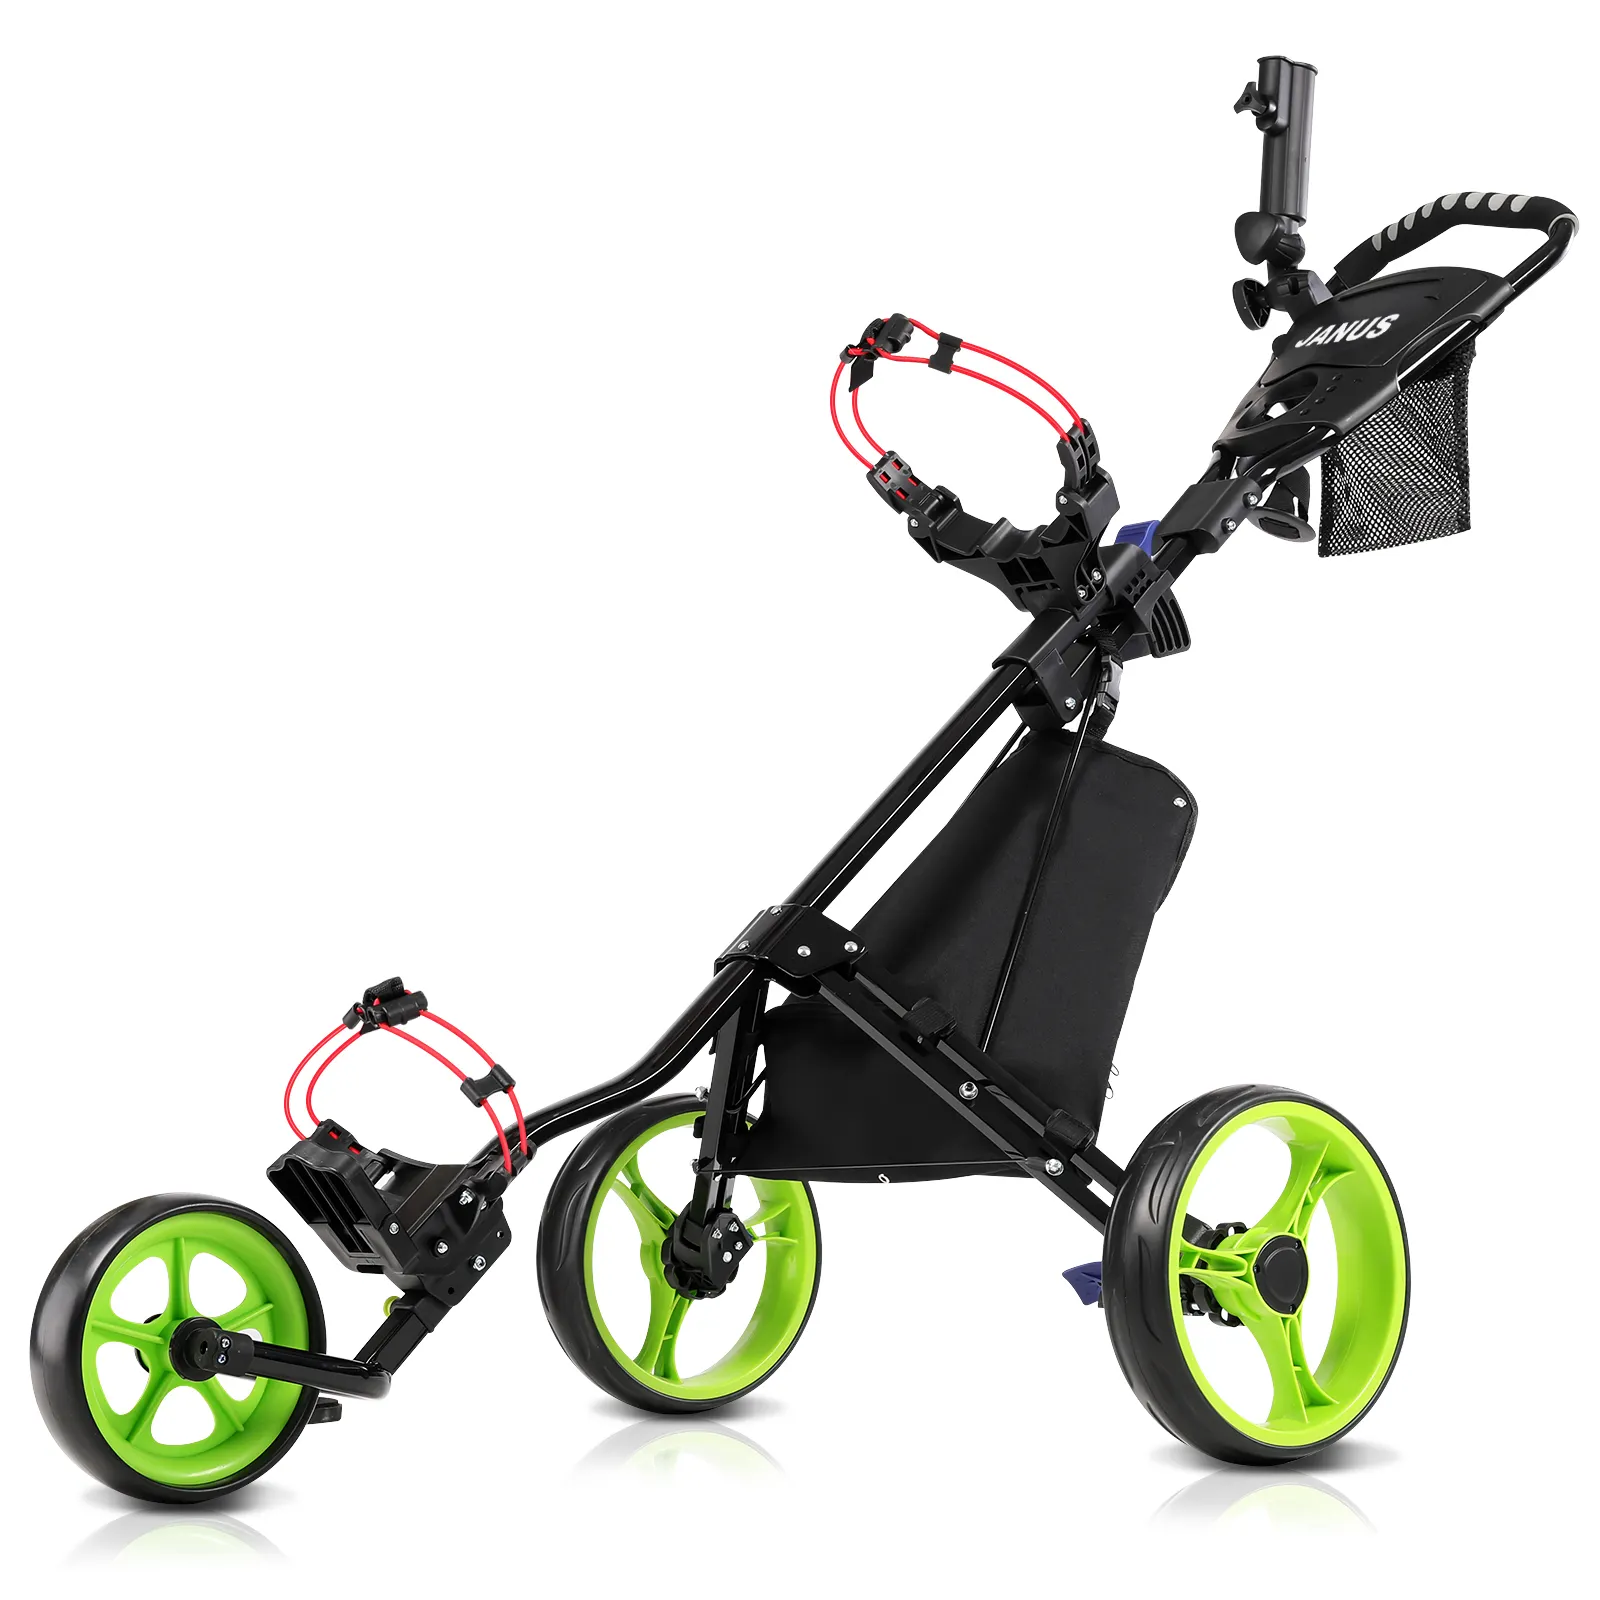 Factory Direct Golf Multifunction Foldable Storage Golf Buggy For Smooth Driving On Any Terrain